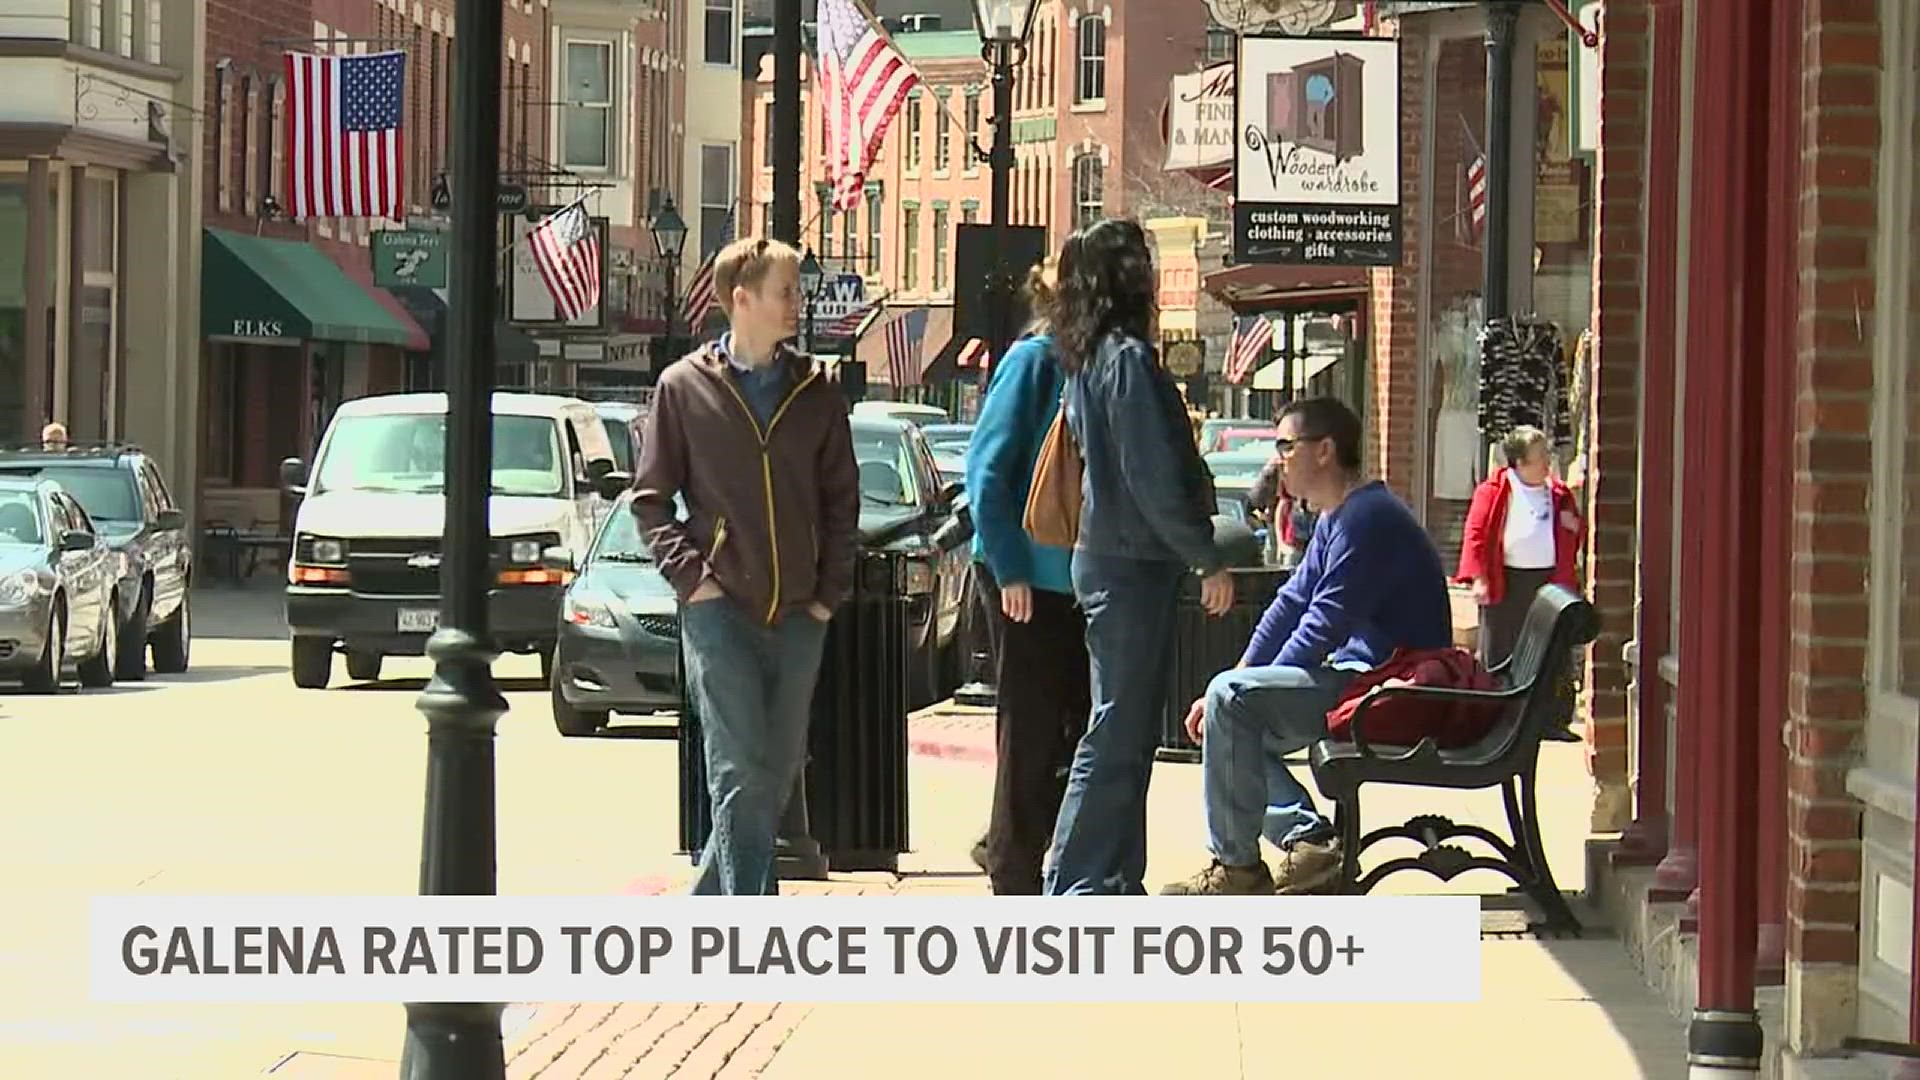 One travel agent describes Galena, Illinois as a place where time "stands still".